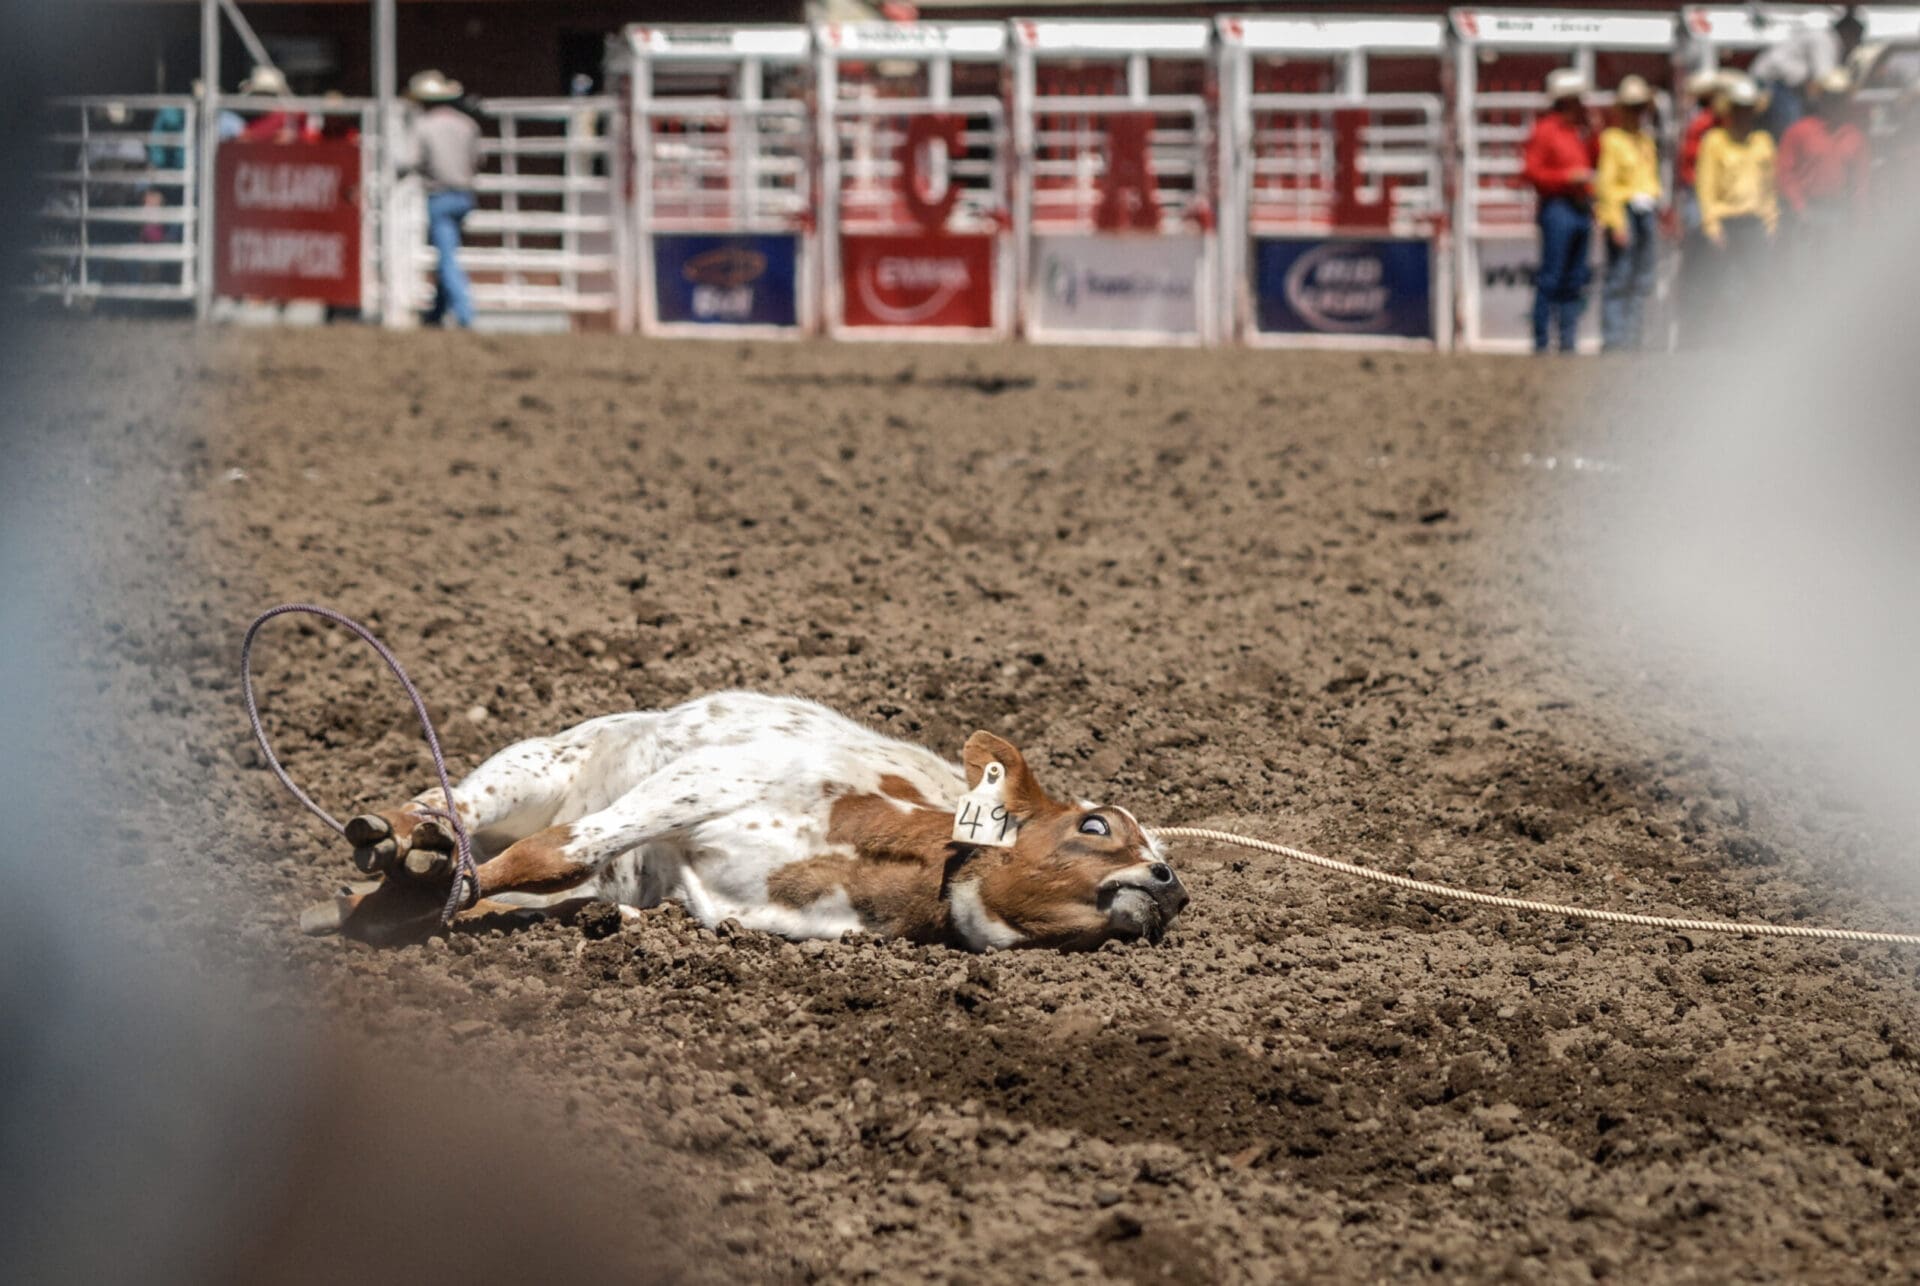 A young calf lies on the ground during a roping event at the Calgary Stampede